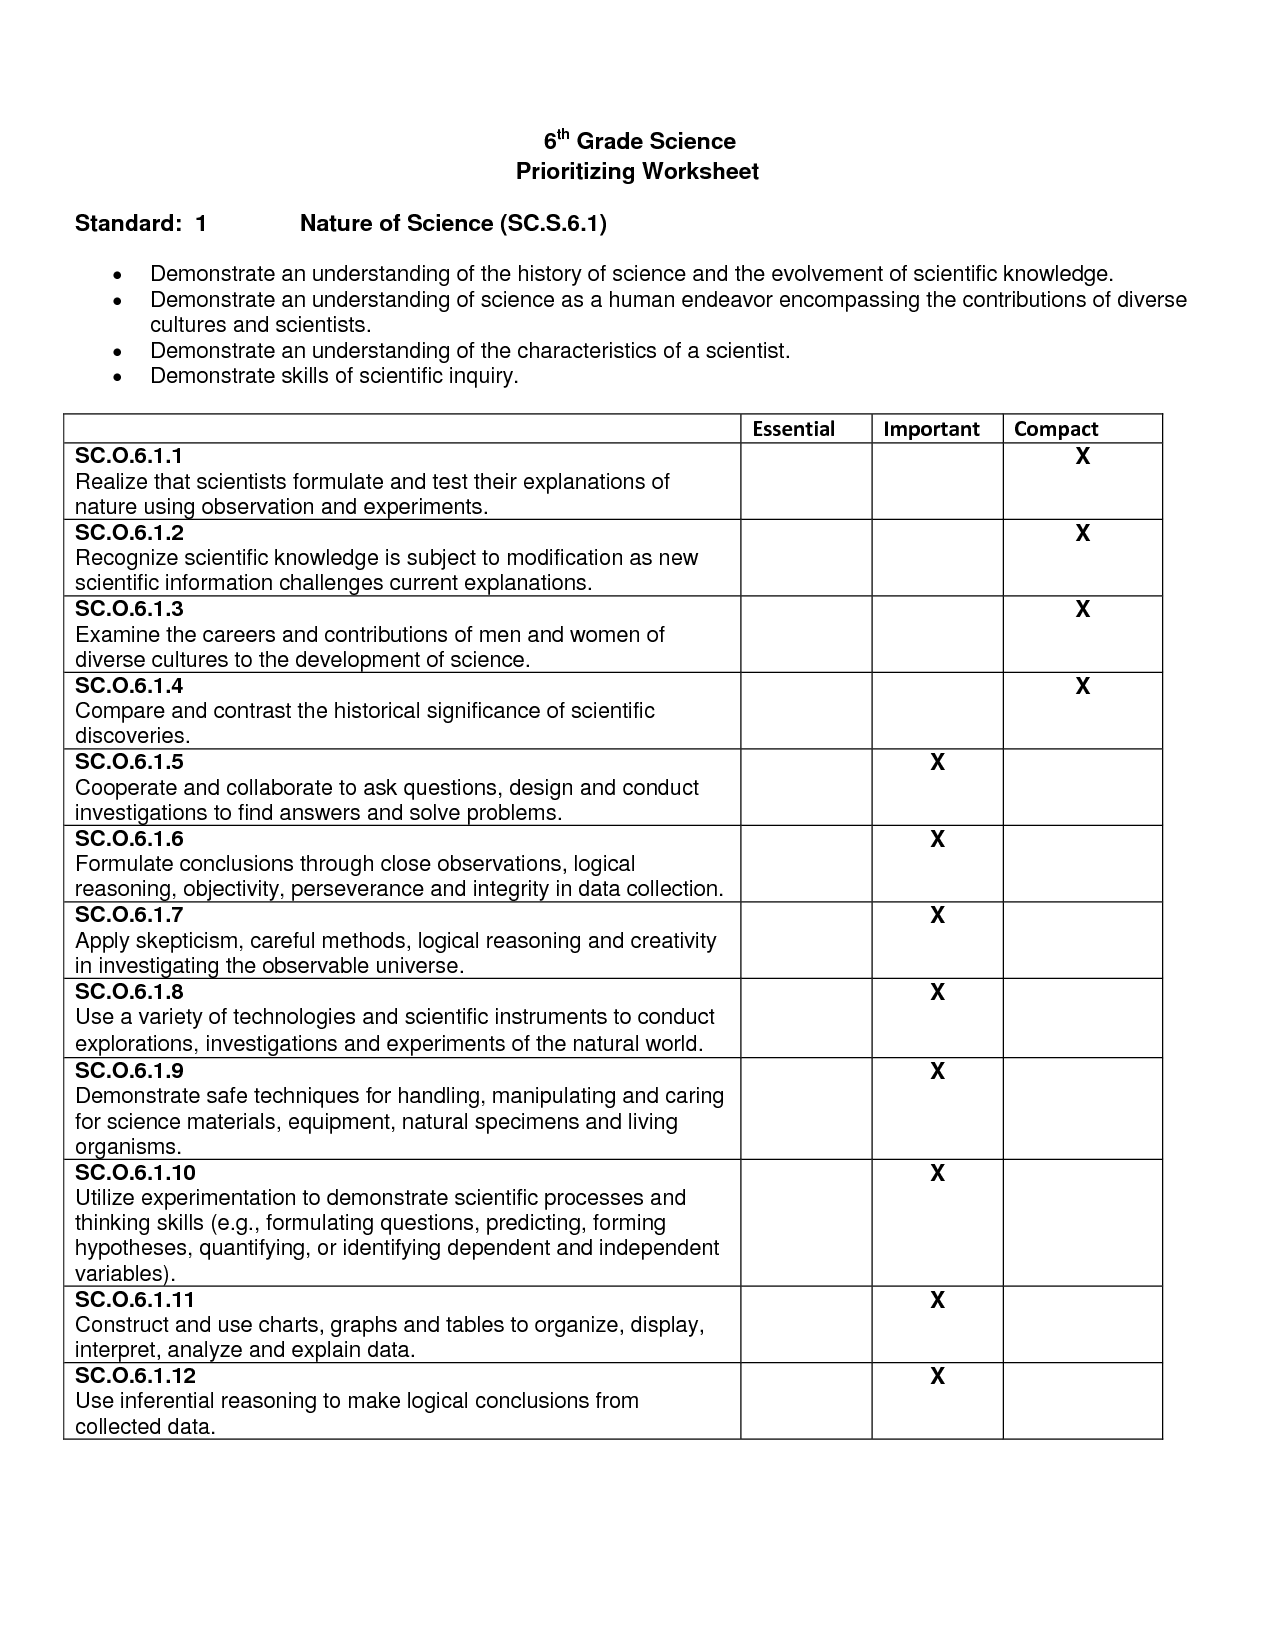 8 Best Images of Fronts Worksheet Answer Key - Types of Weather Fronts